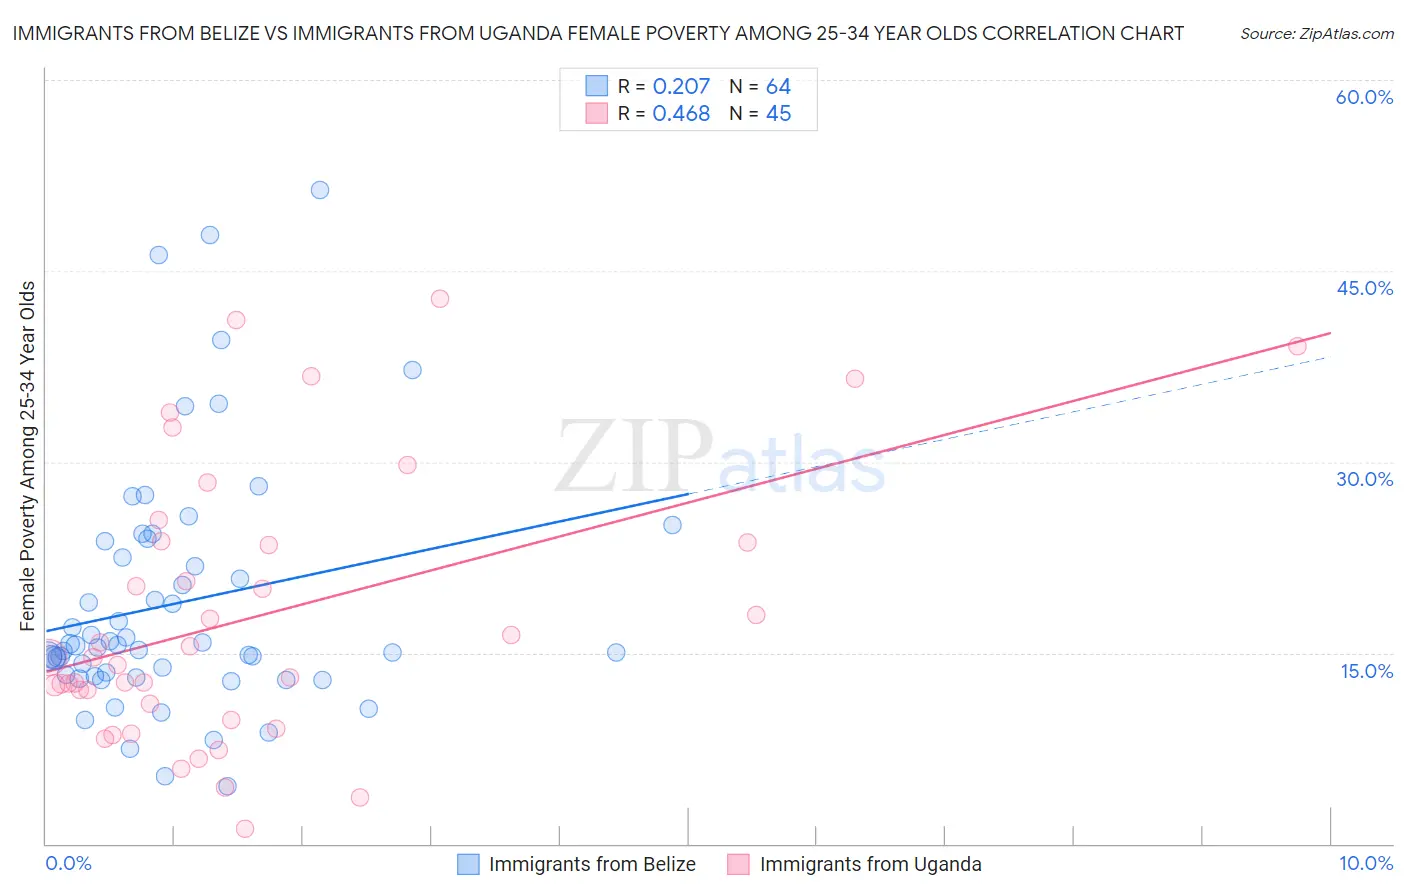 Immigrants from Belize vs Immigrants from Uganda Female Poverty Among 25-34 Year Olds